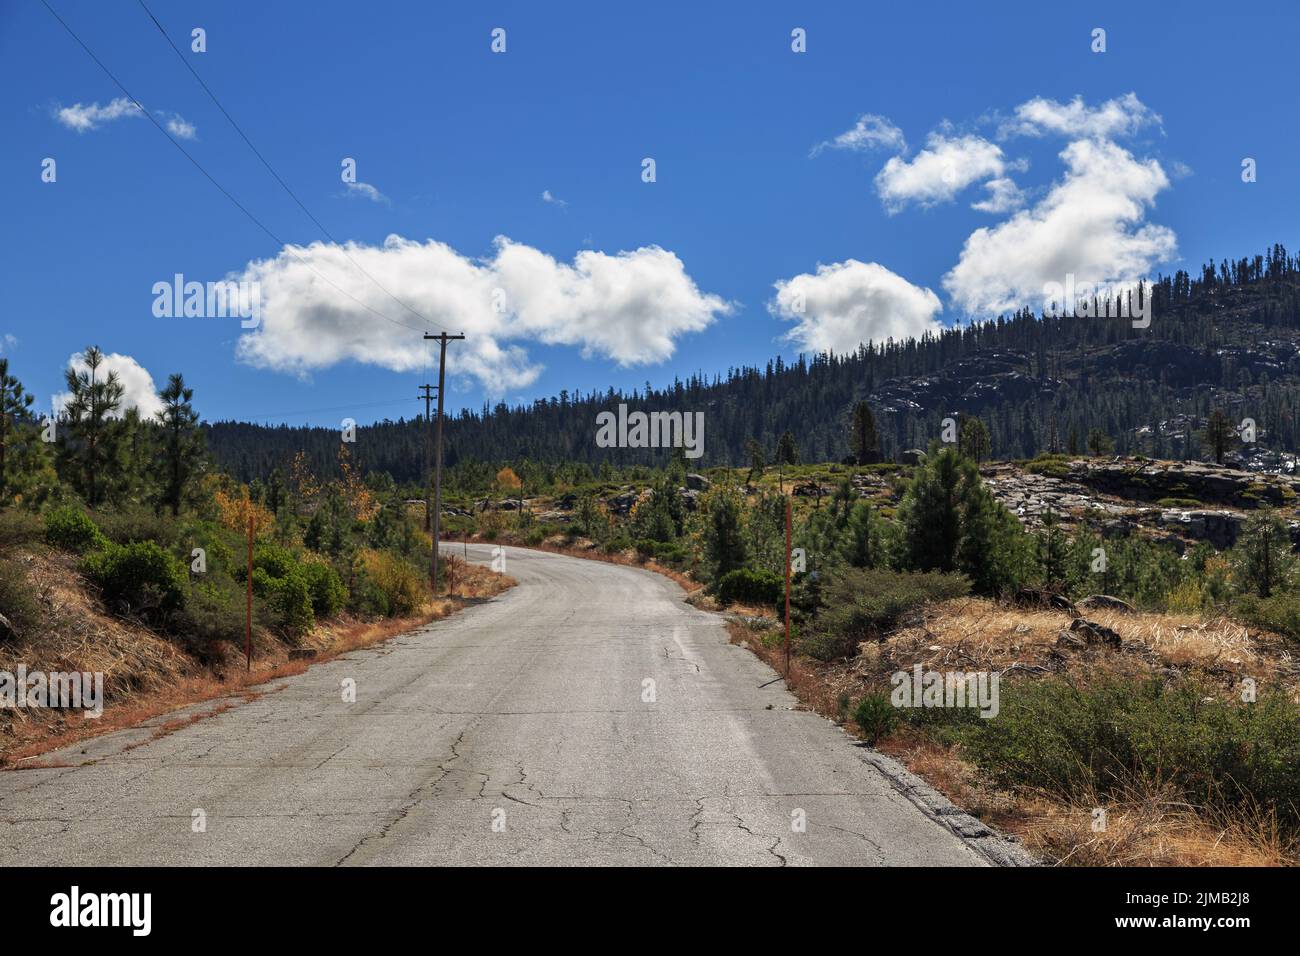 Paved country road leads through mountains on the California side of the Sierra Nevada. Stock Photo